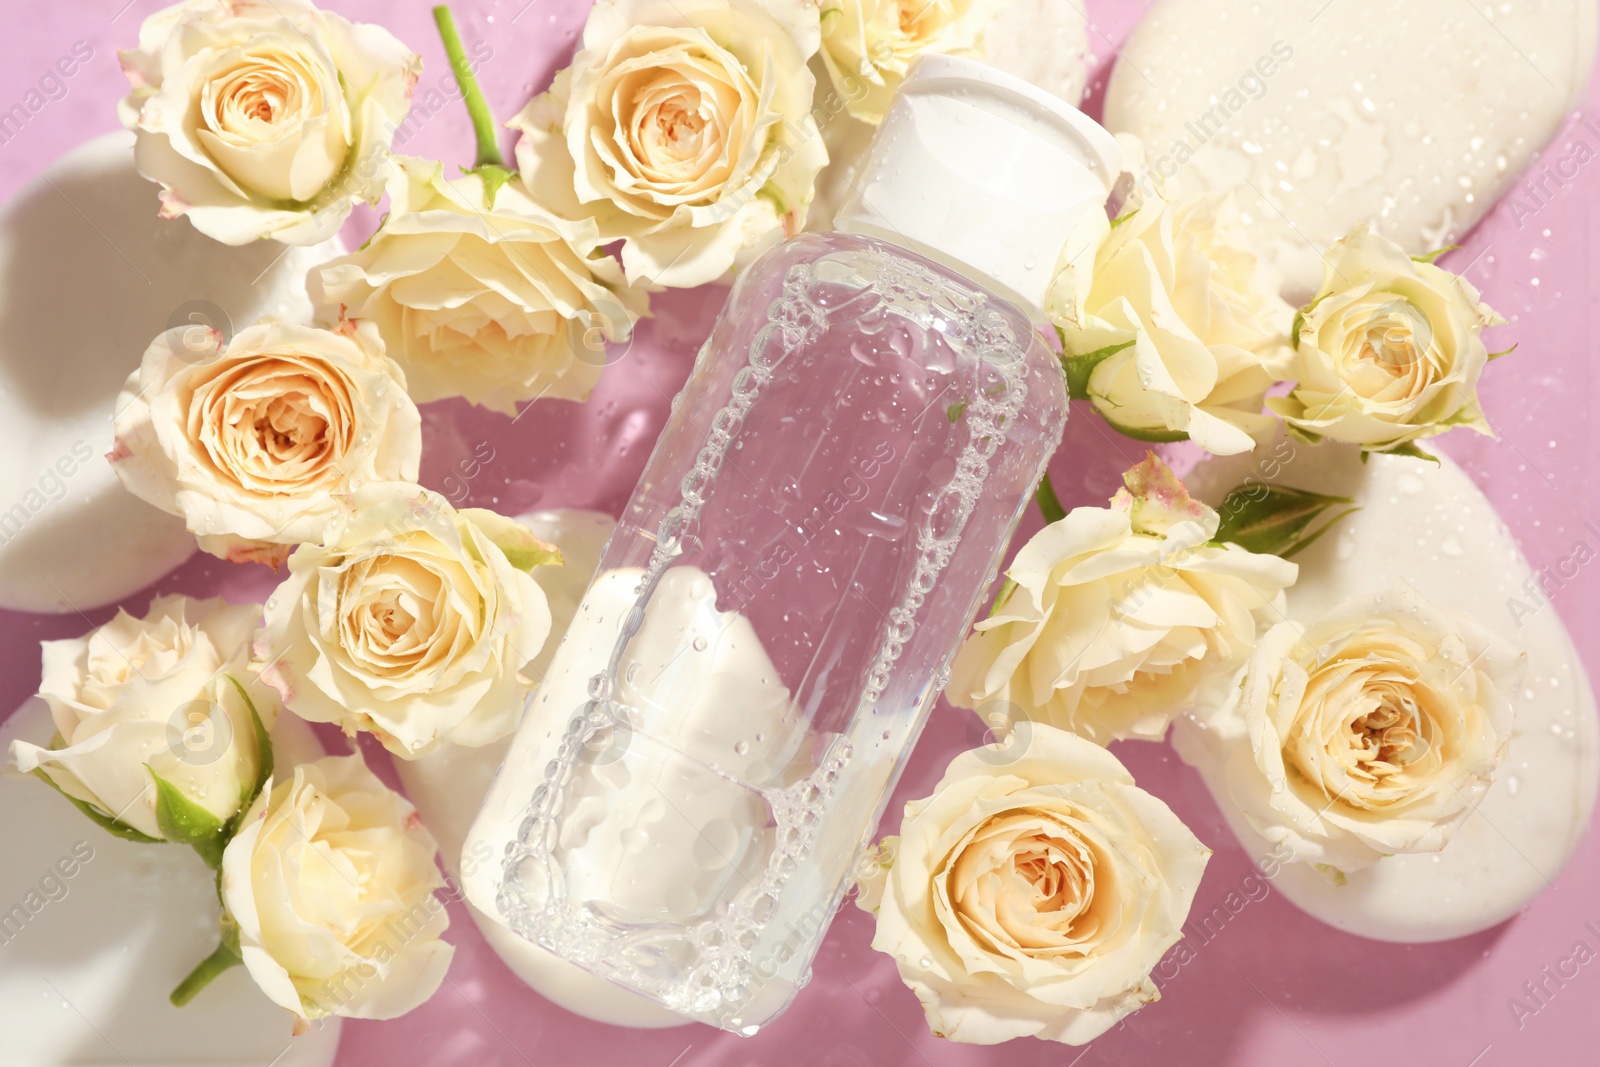 Photo of Wet bottle of micellar water, beautiful white roses and spa stones on pink background, flat lay